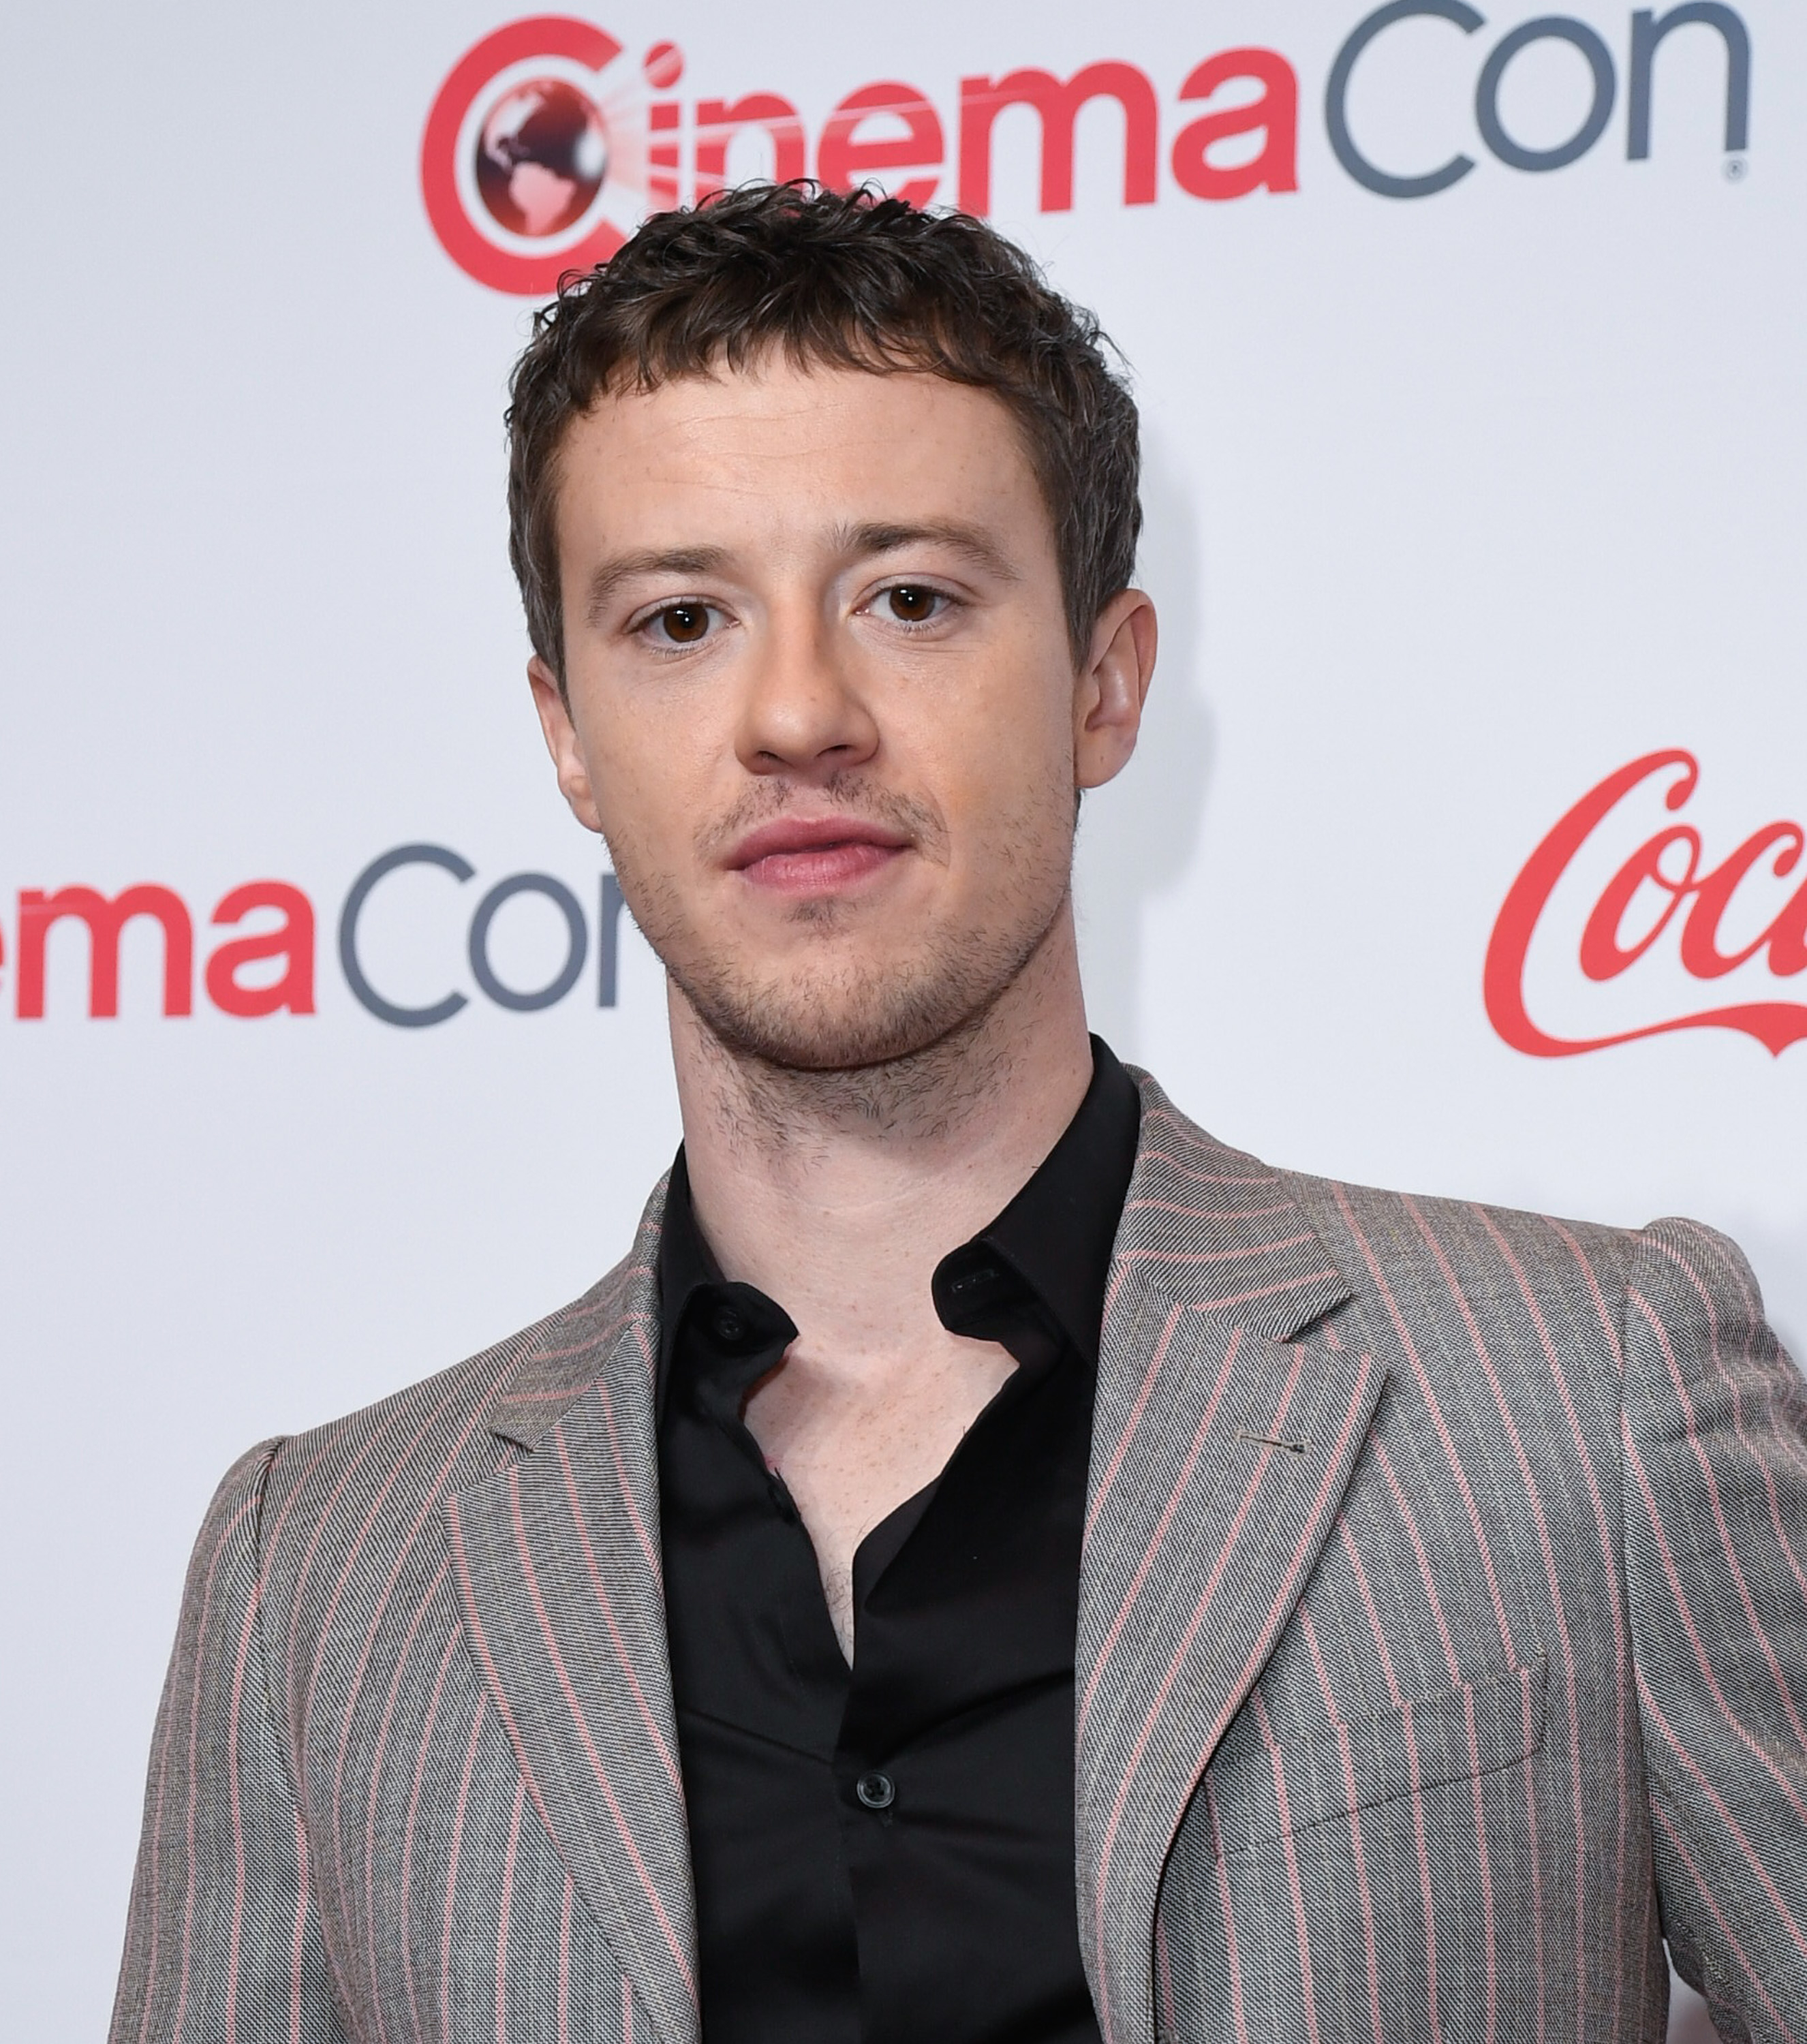 Joseph Quinn poses for a photo at CinemaCon, wearing a pinstriped suit over a black shirt